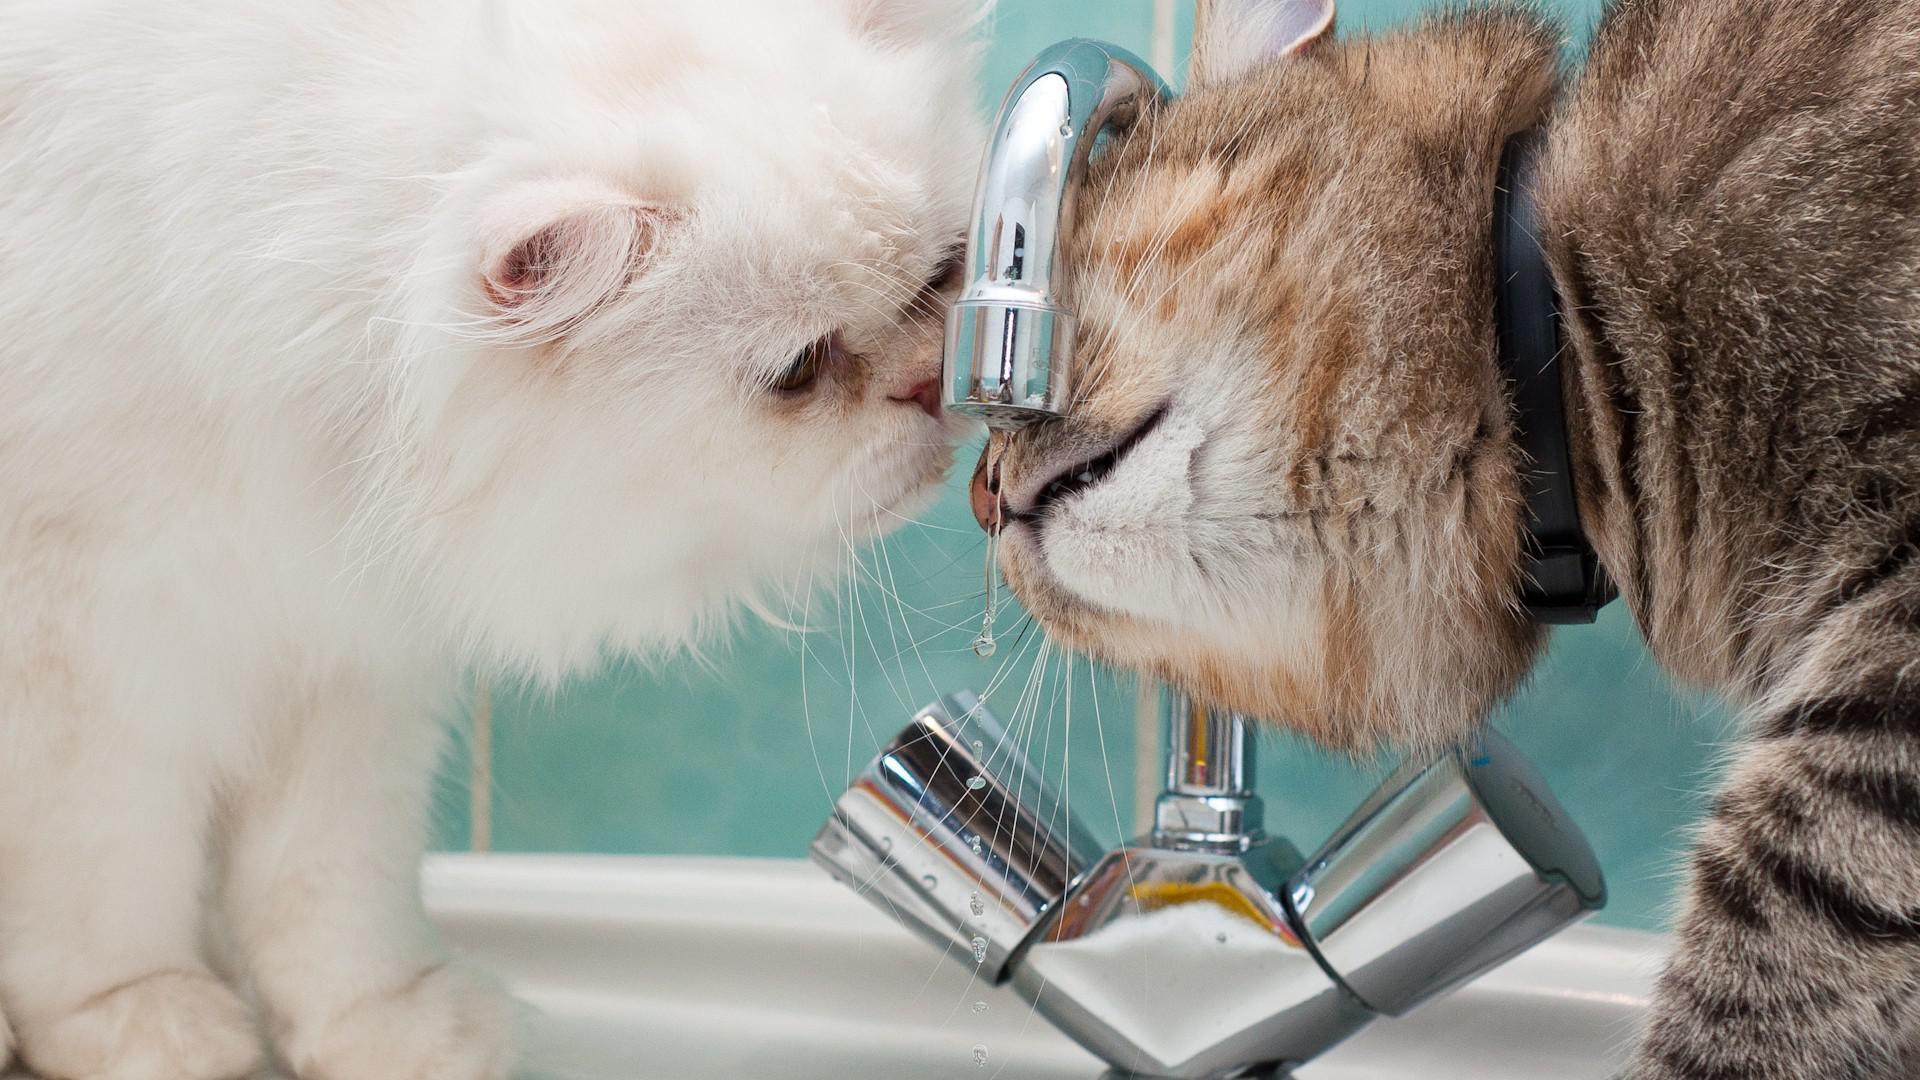 Animals___Cats_Two_cats_drink_water_from_the_tap_097771_